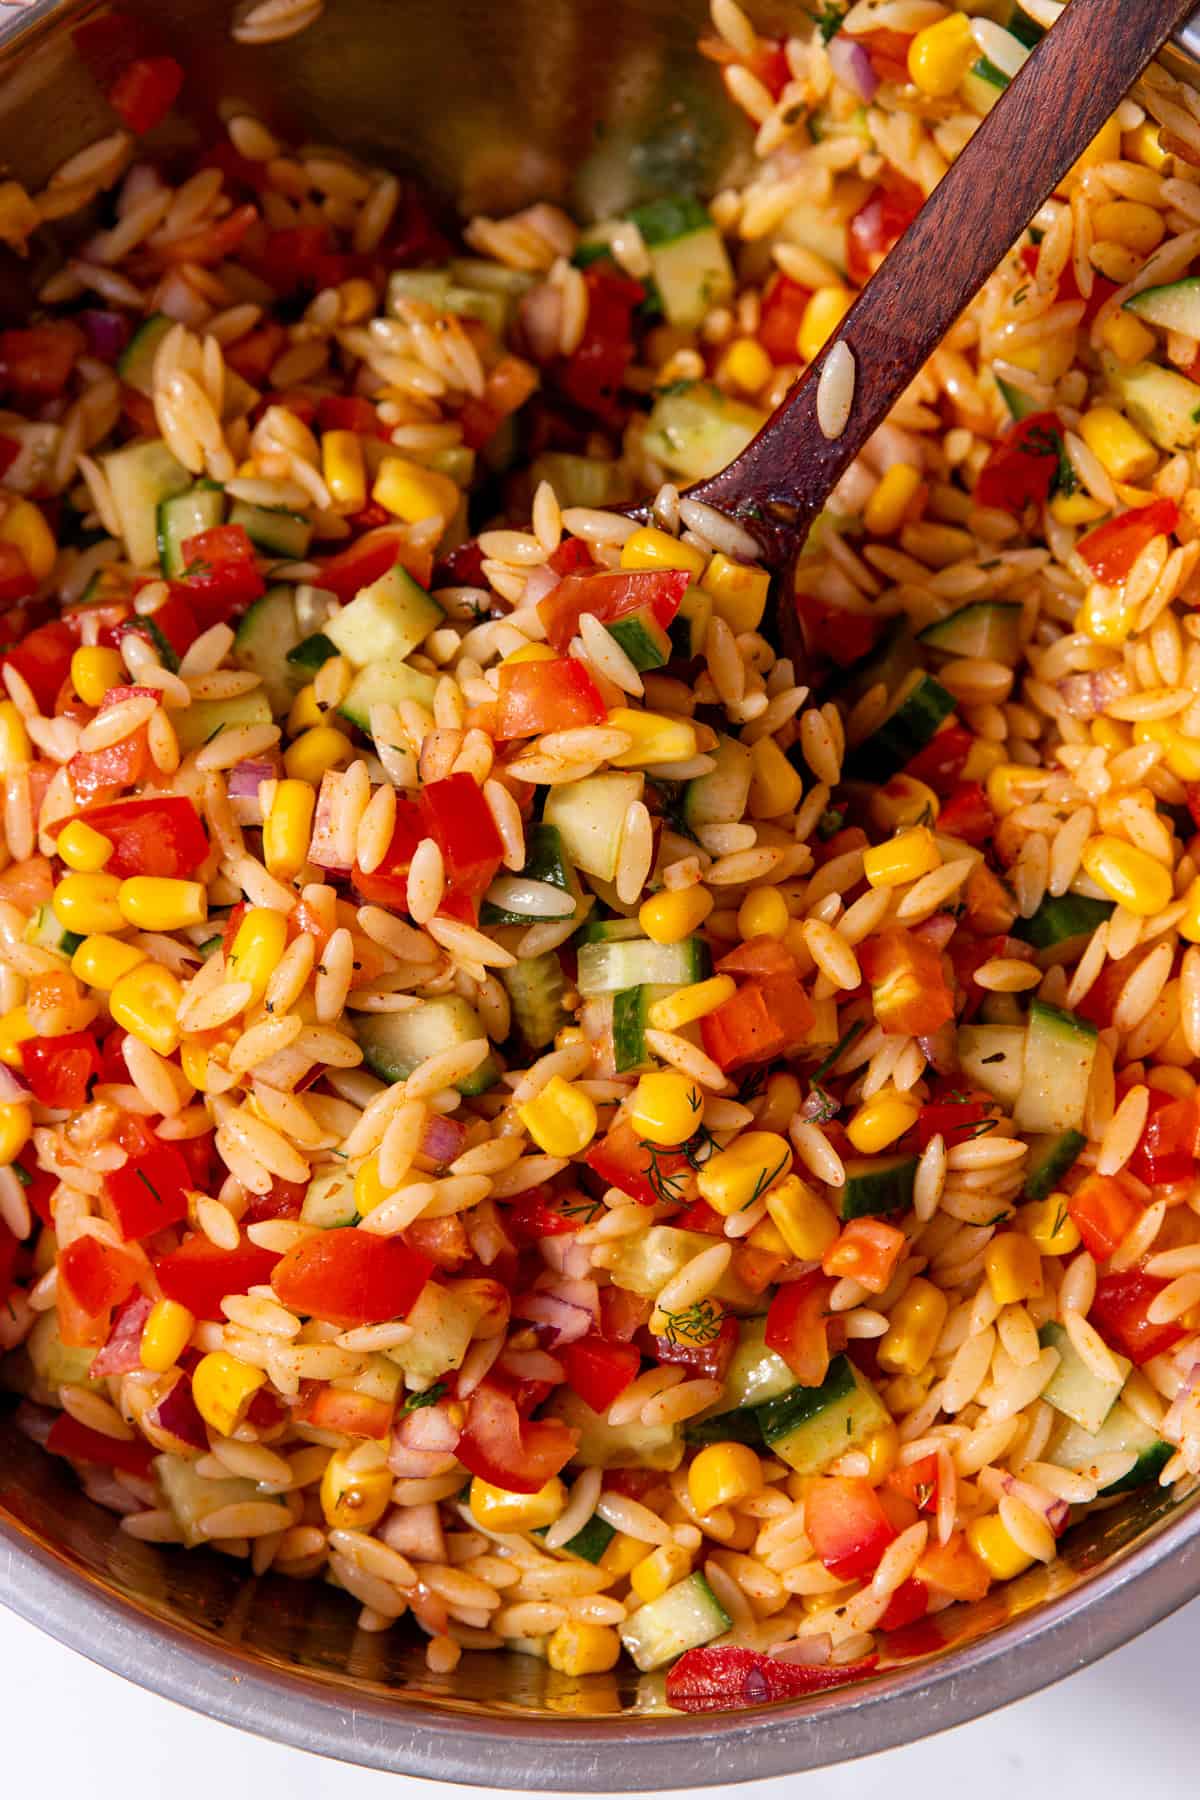 Orzo pasta salad with chopped tomatoes, cucumber, sweet corn and red onion in a metal bowl.